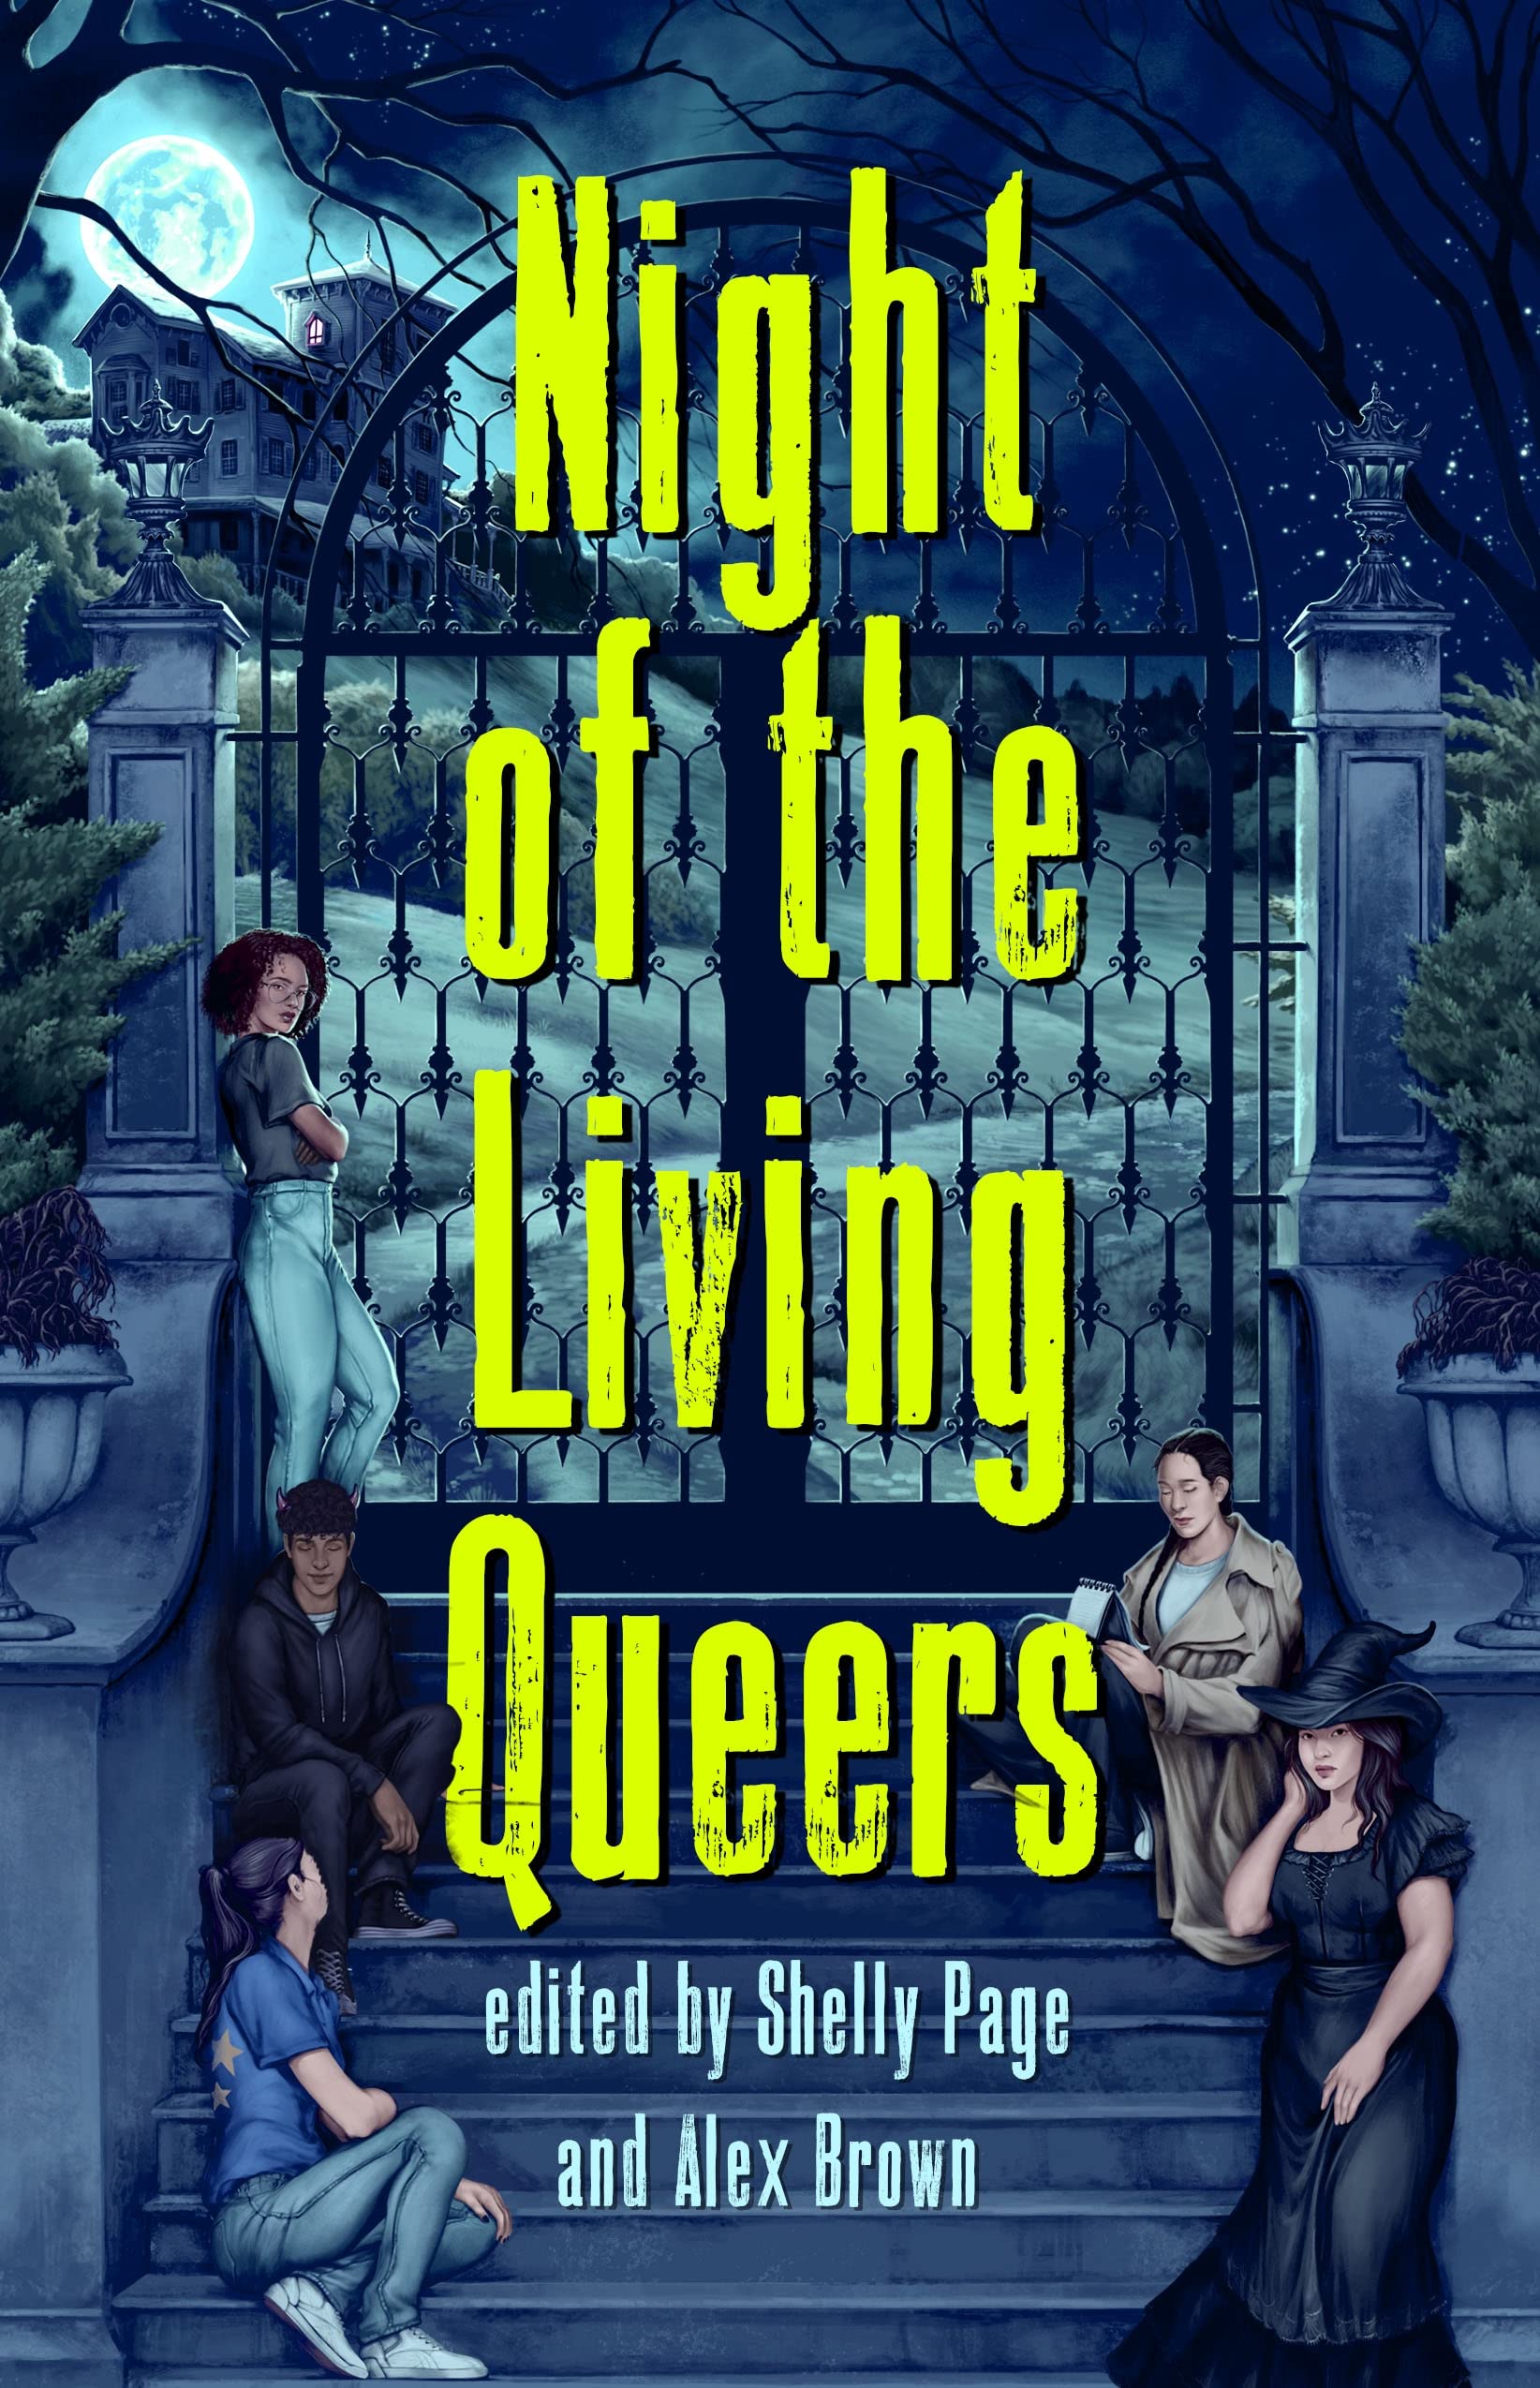 Night of the Living Queers by Shelly Page and Alex Brown